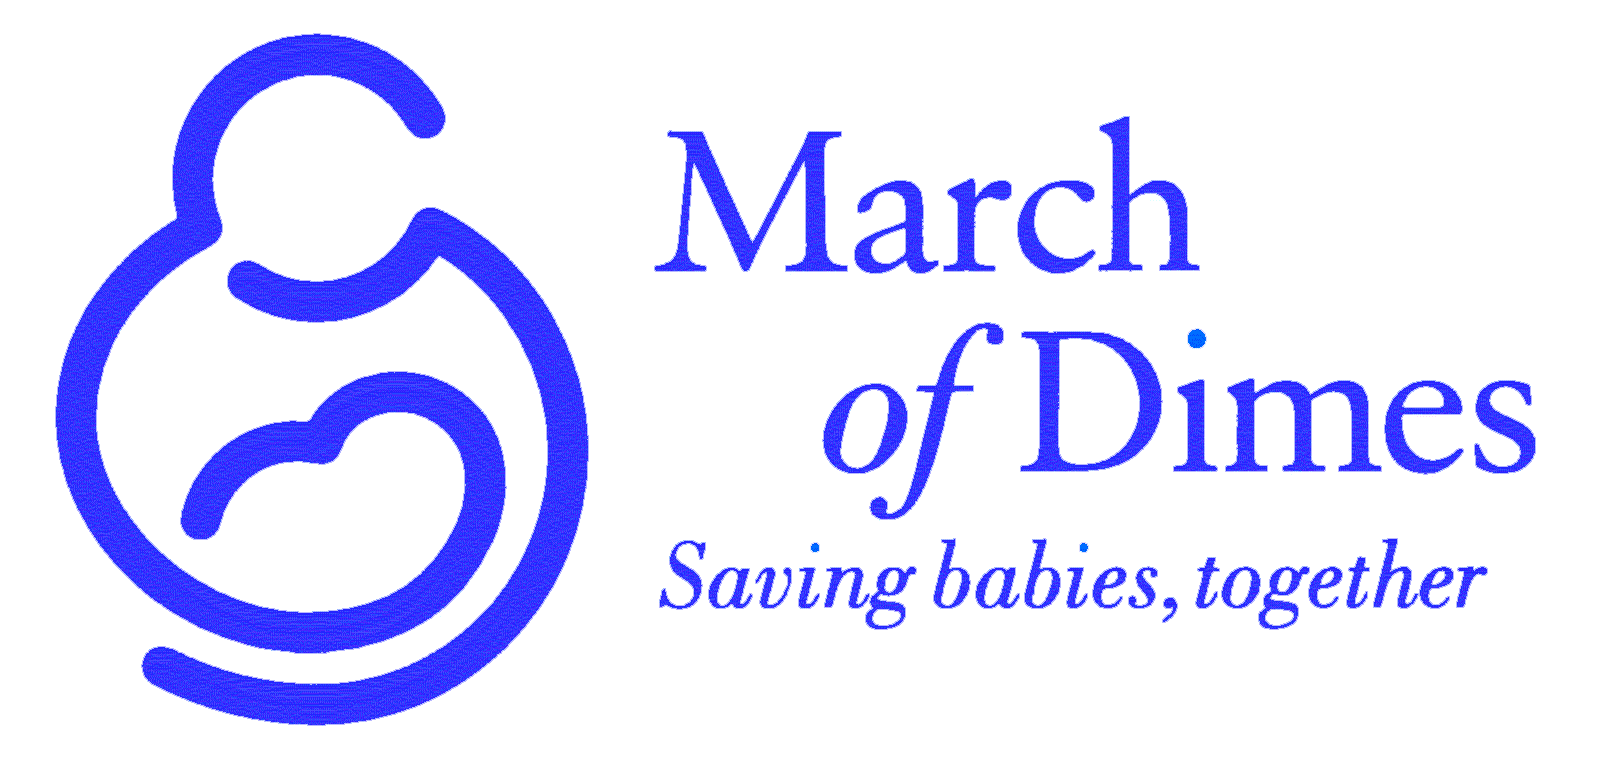 MARCH OF DIMES: Friend or Foe to the Babies? | GRTLs E-News